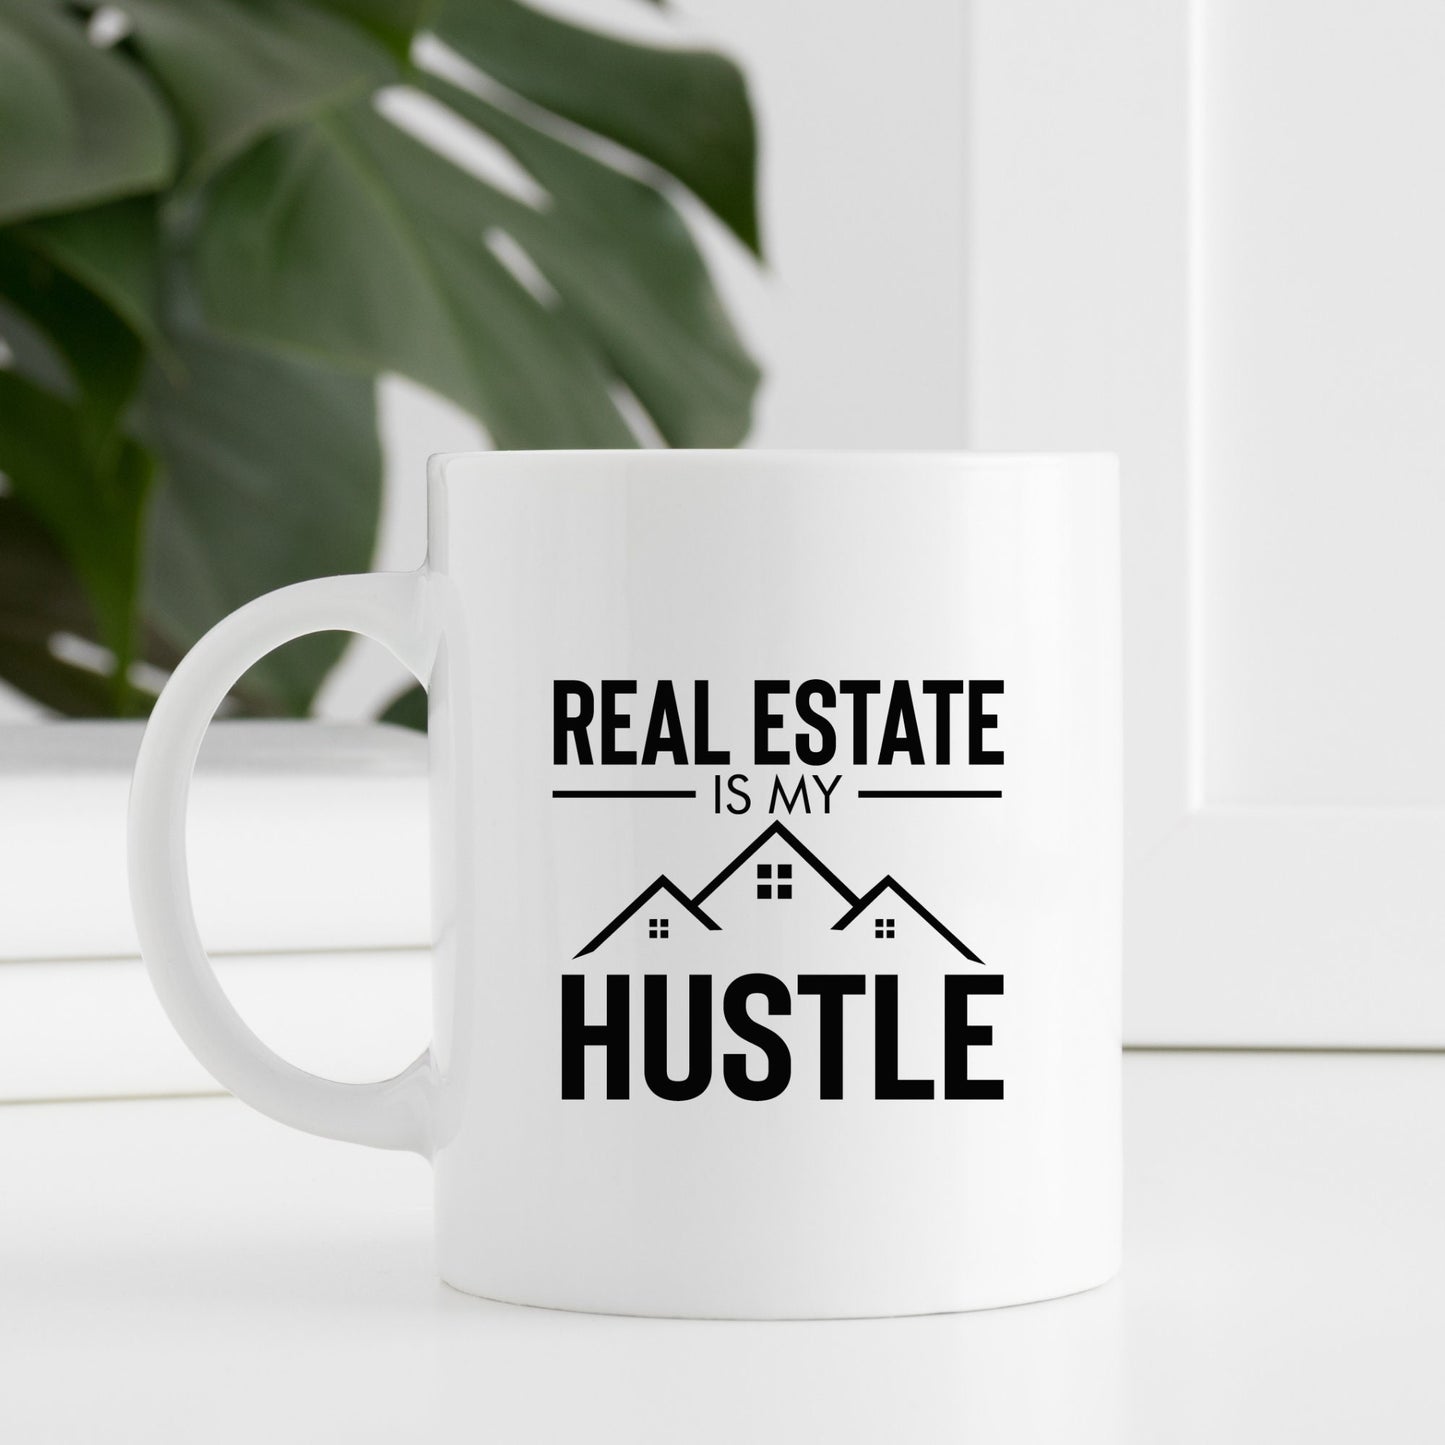 Real Estate is my Hustle